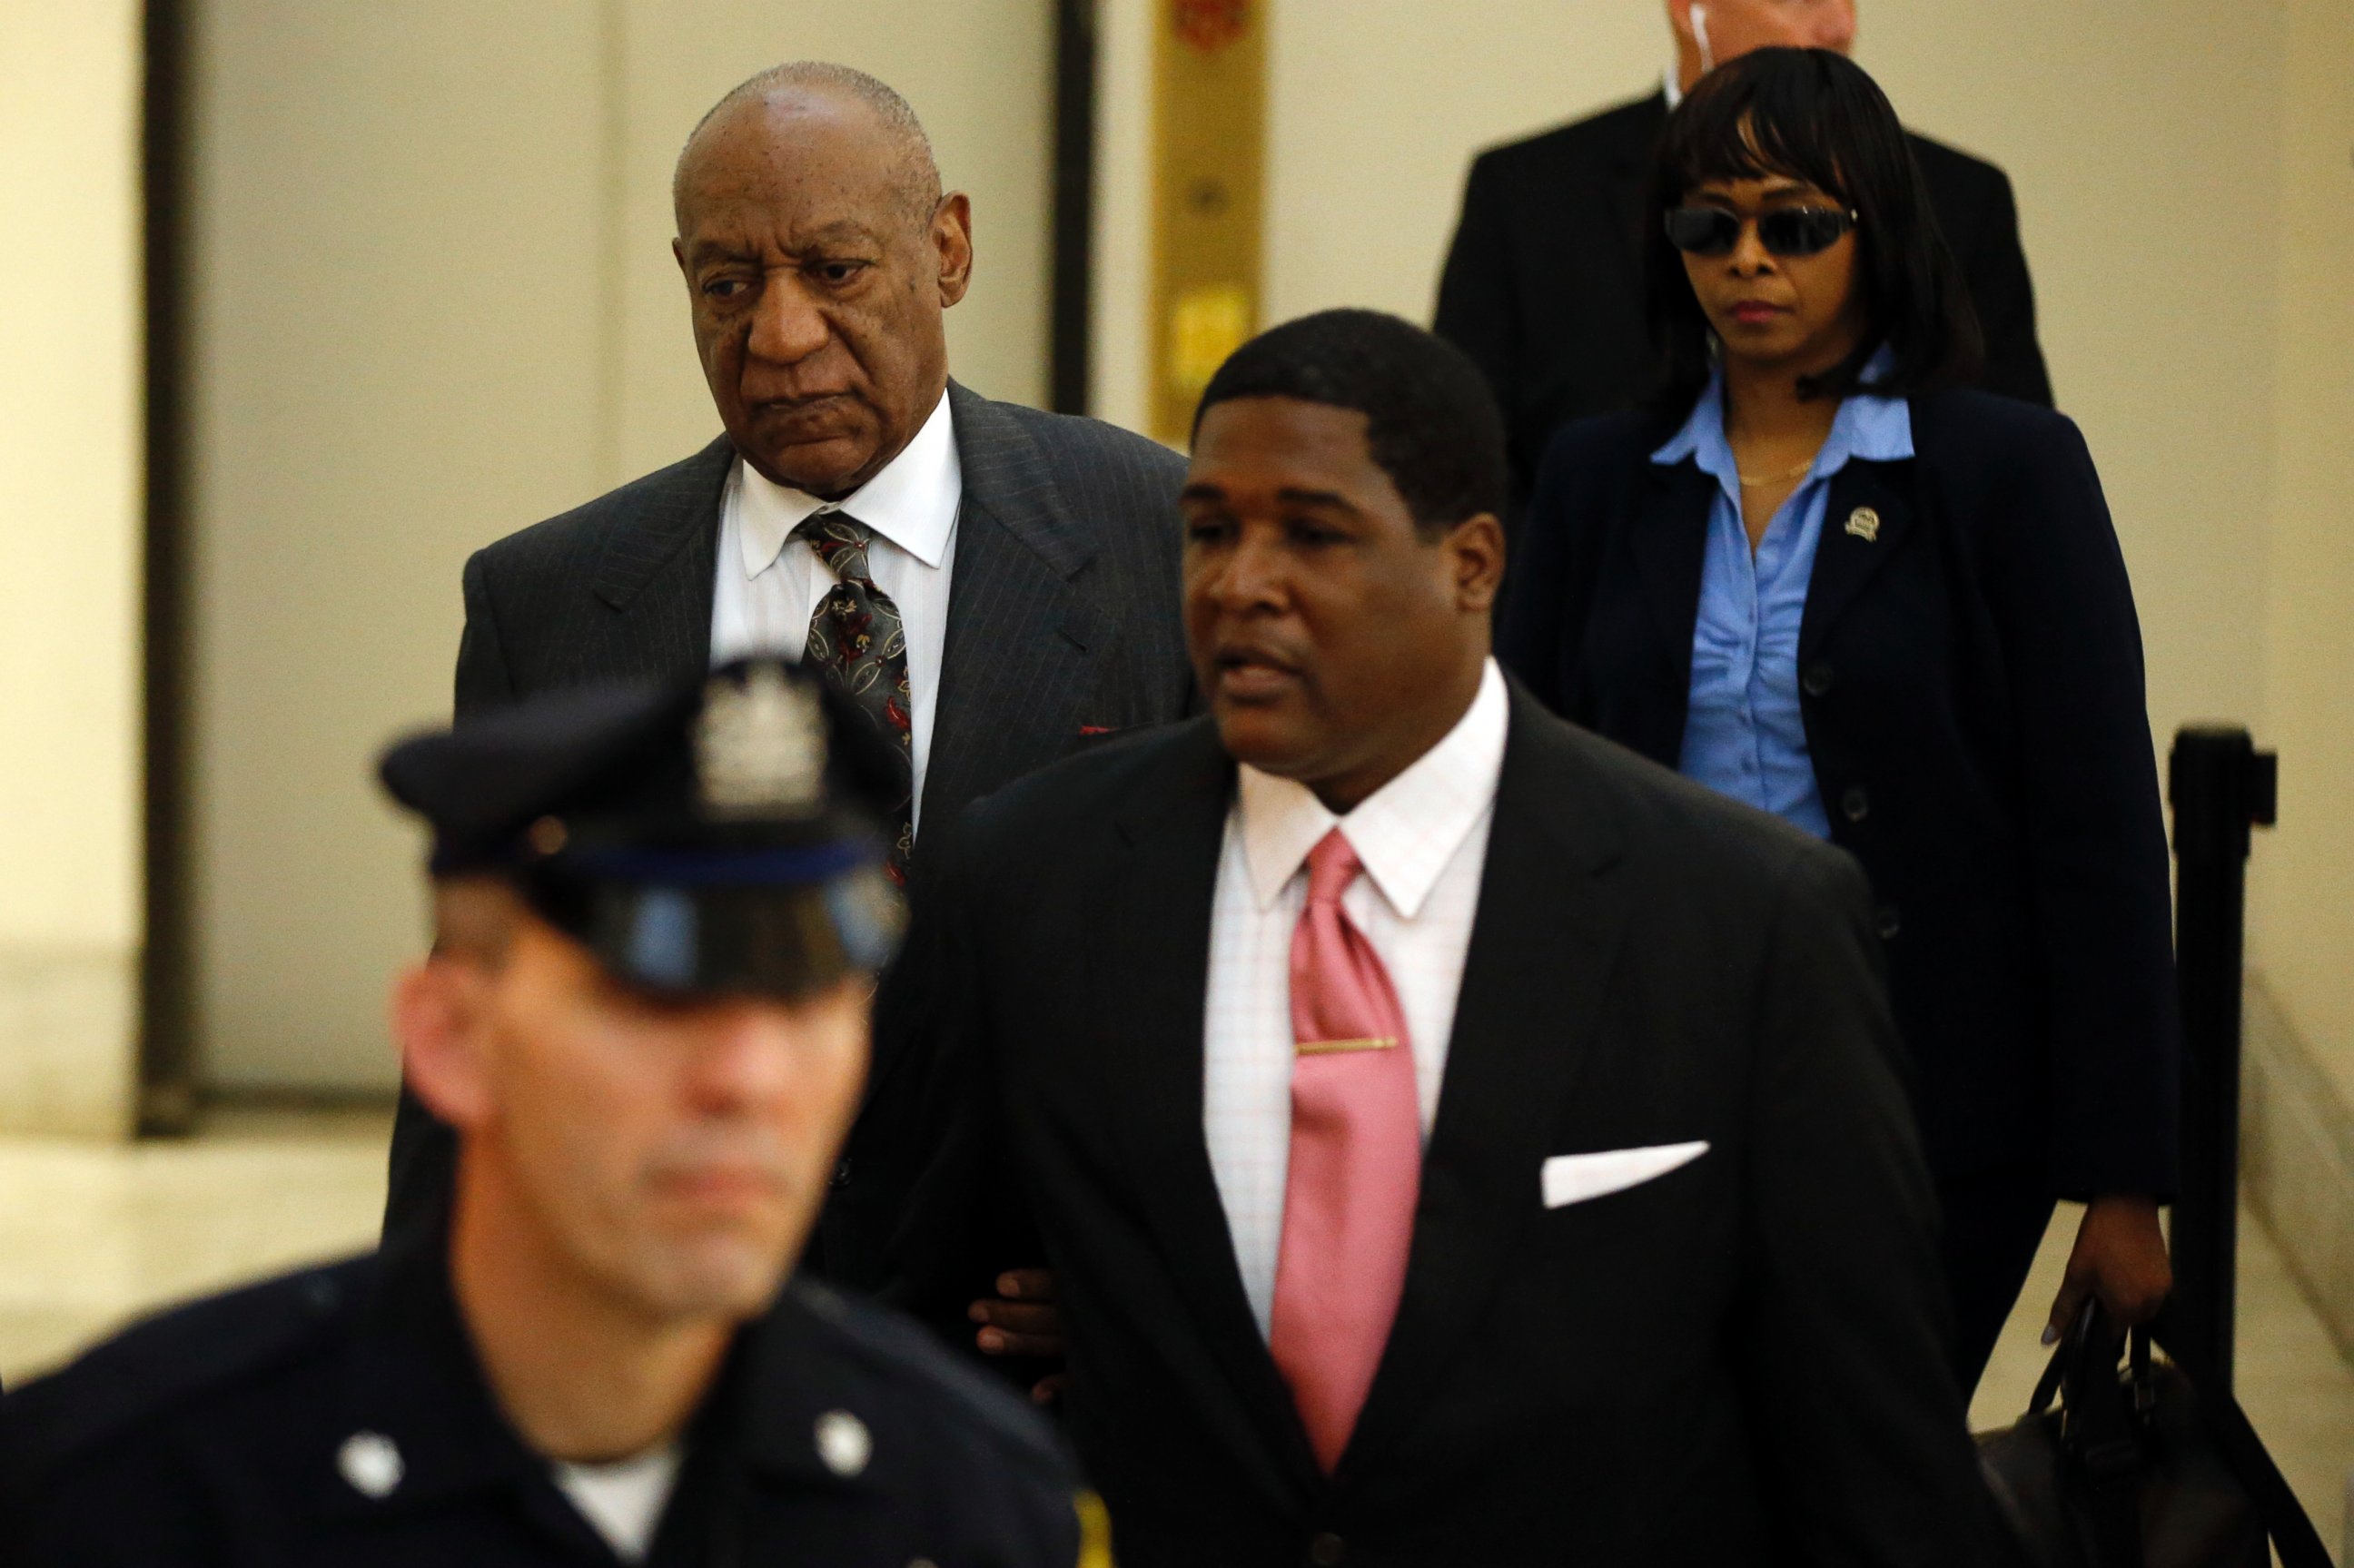 PHOTO: Bill Cosby arrives at the Montgomery County Courthouse for a preliminary hearing, May 24, 2016, in Norristown, Pa.